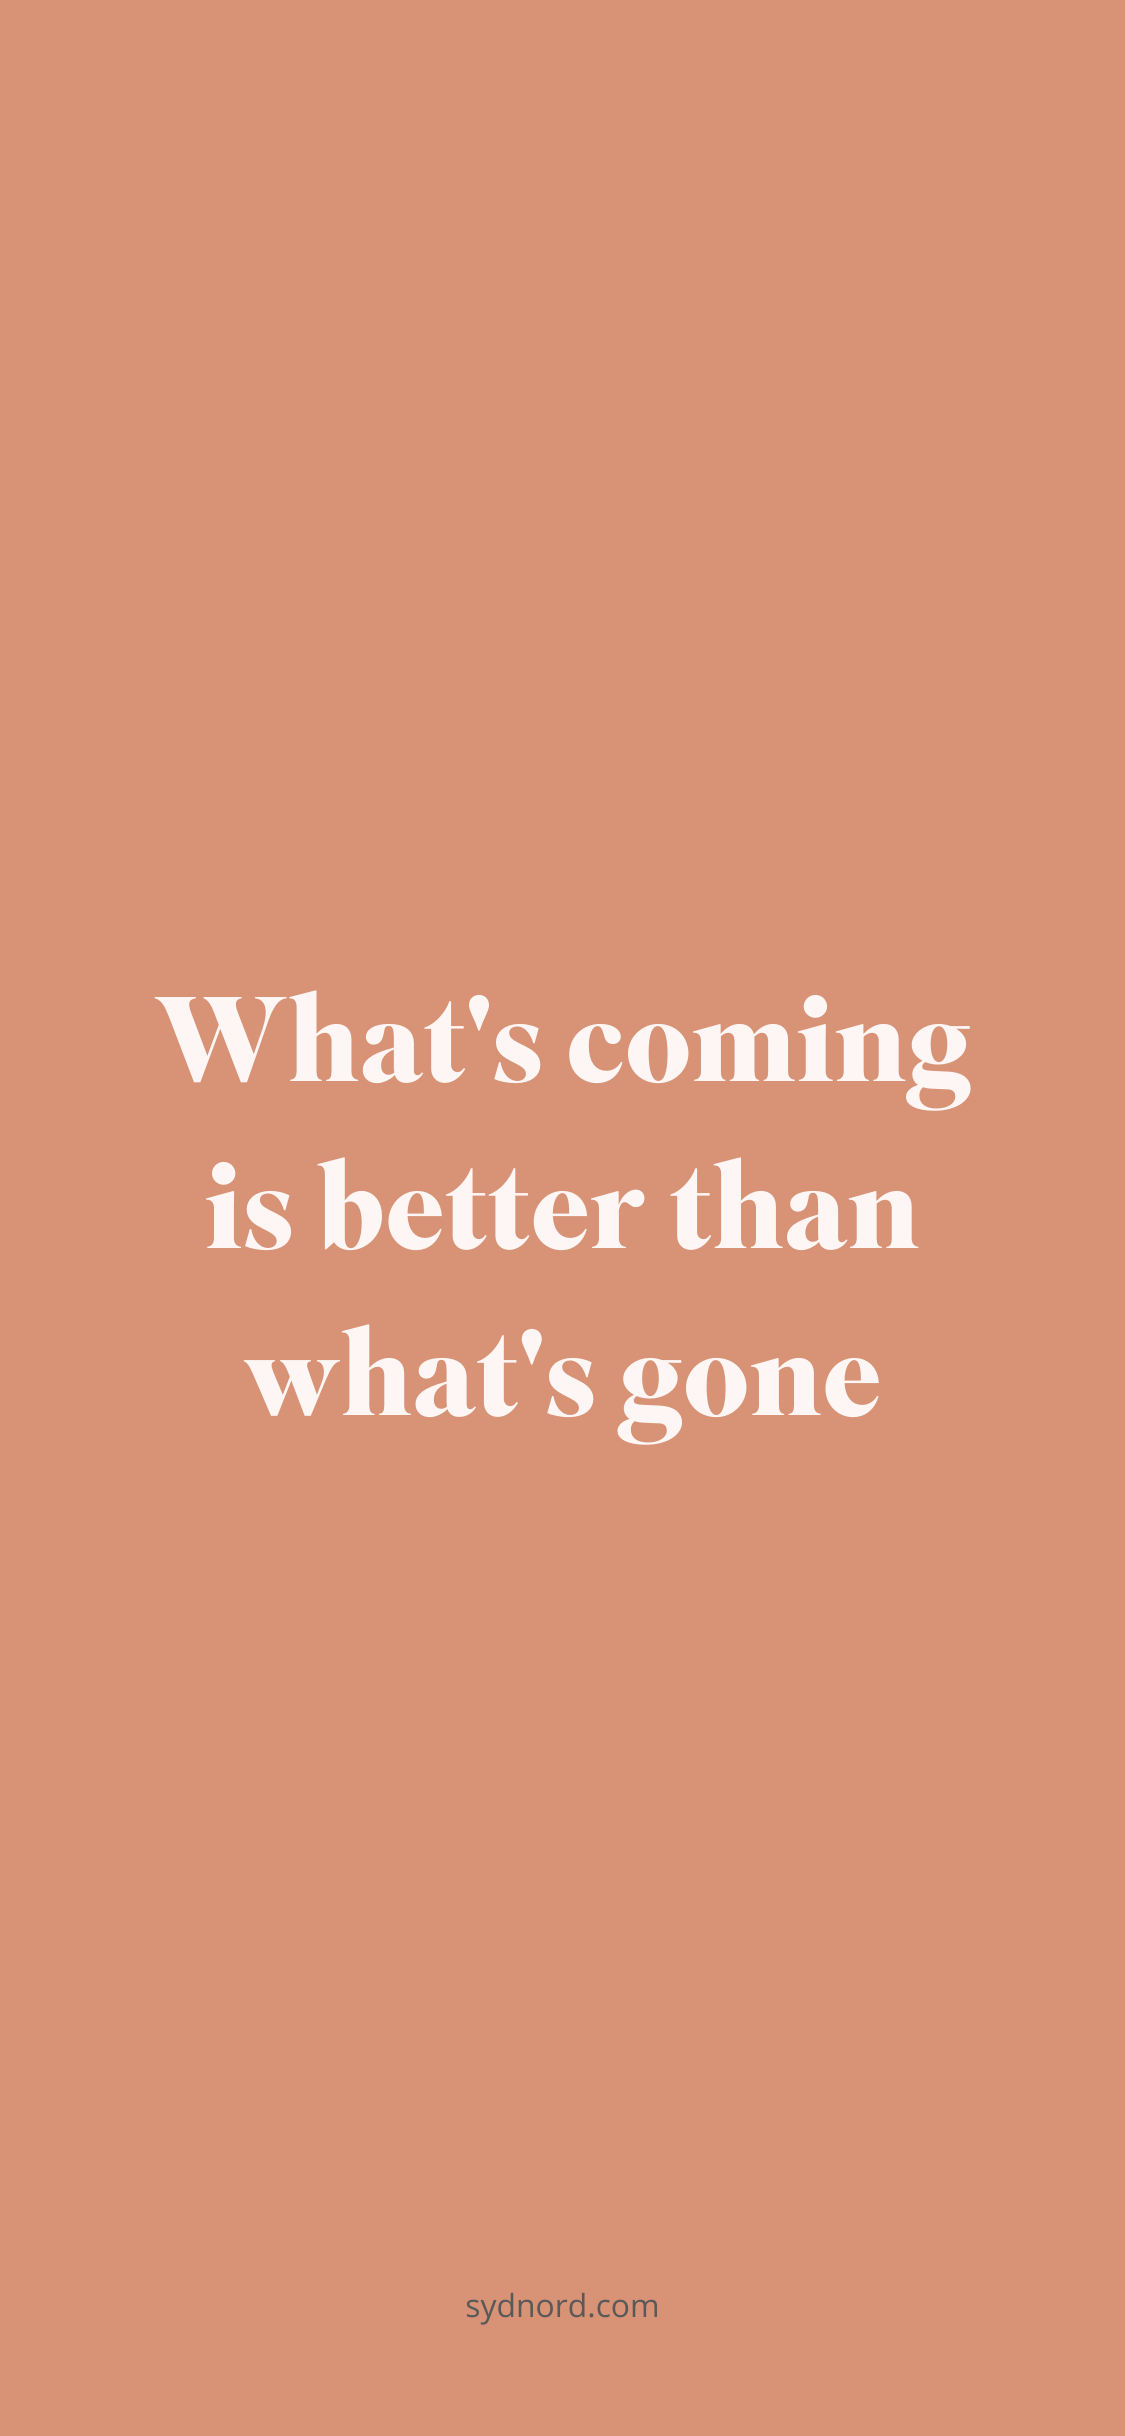 What's coming is better than what's gone